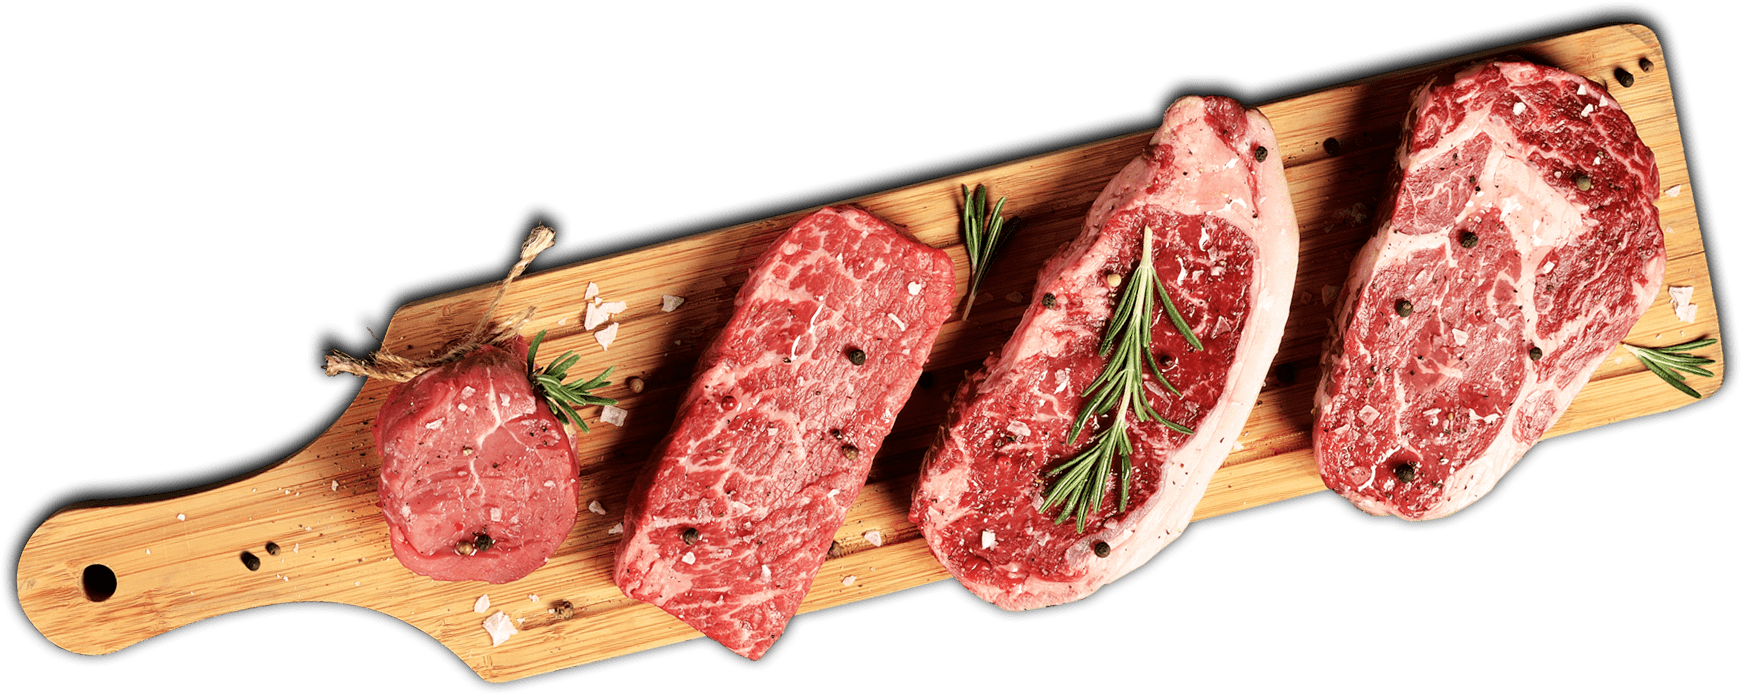 A Group Of Raw Meat On A Wooden Board